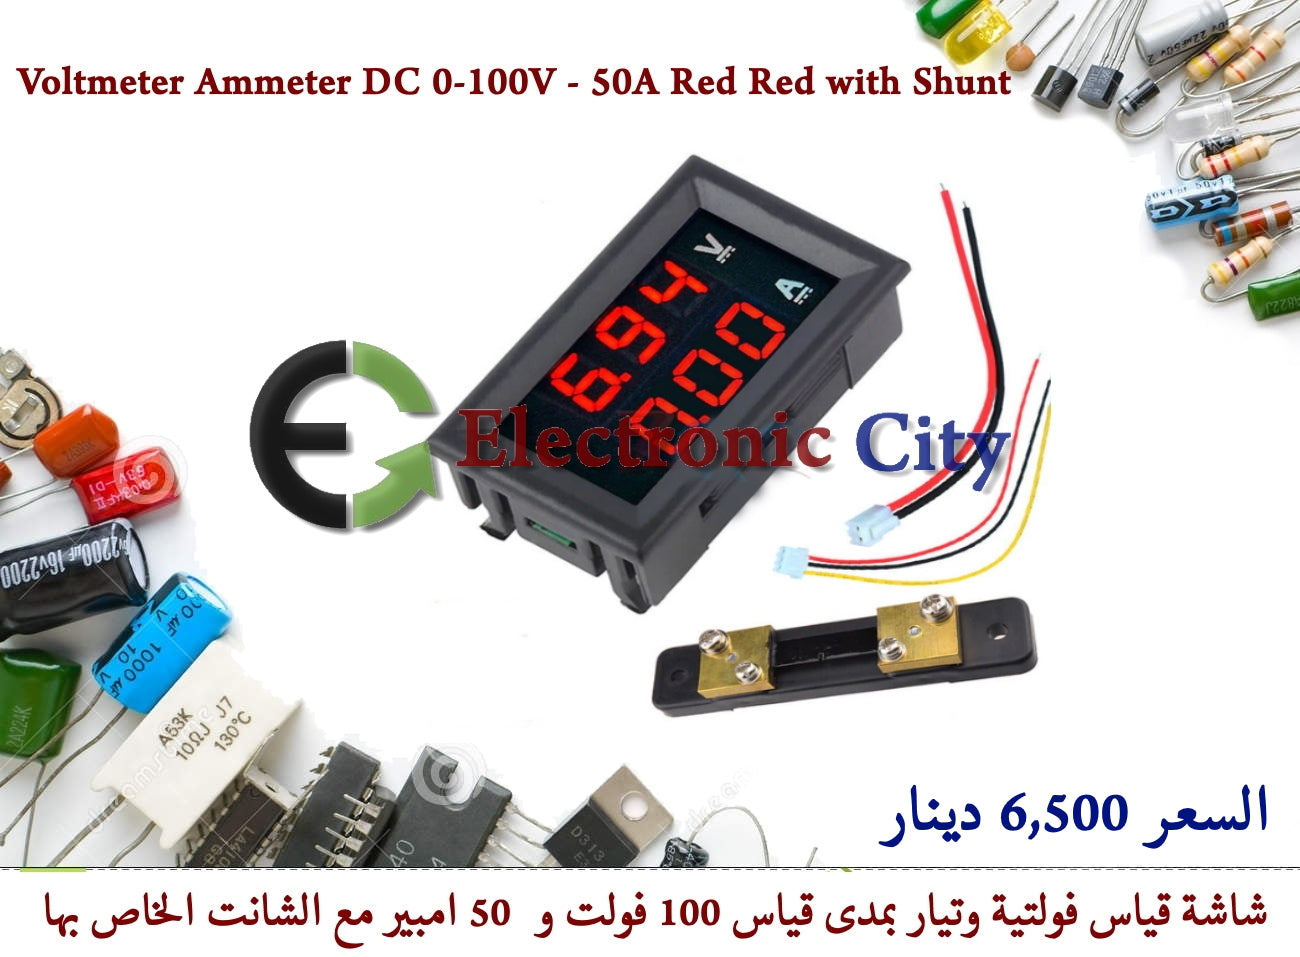 Voltmeter Ammeter DC 0-100V - 50A Red Red with Shunt  #E5 X30558 + 030033